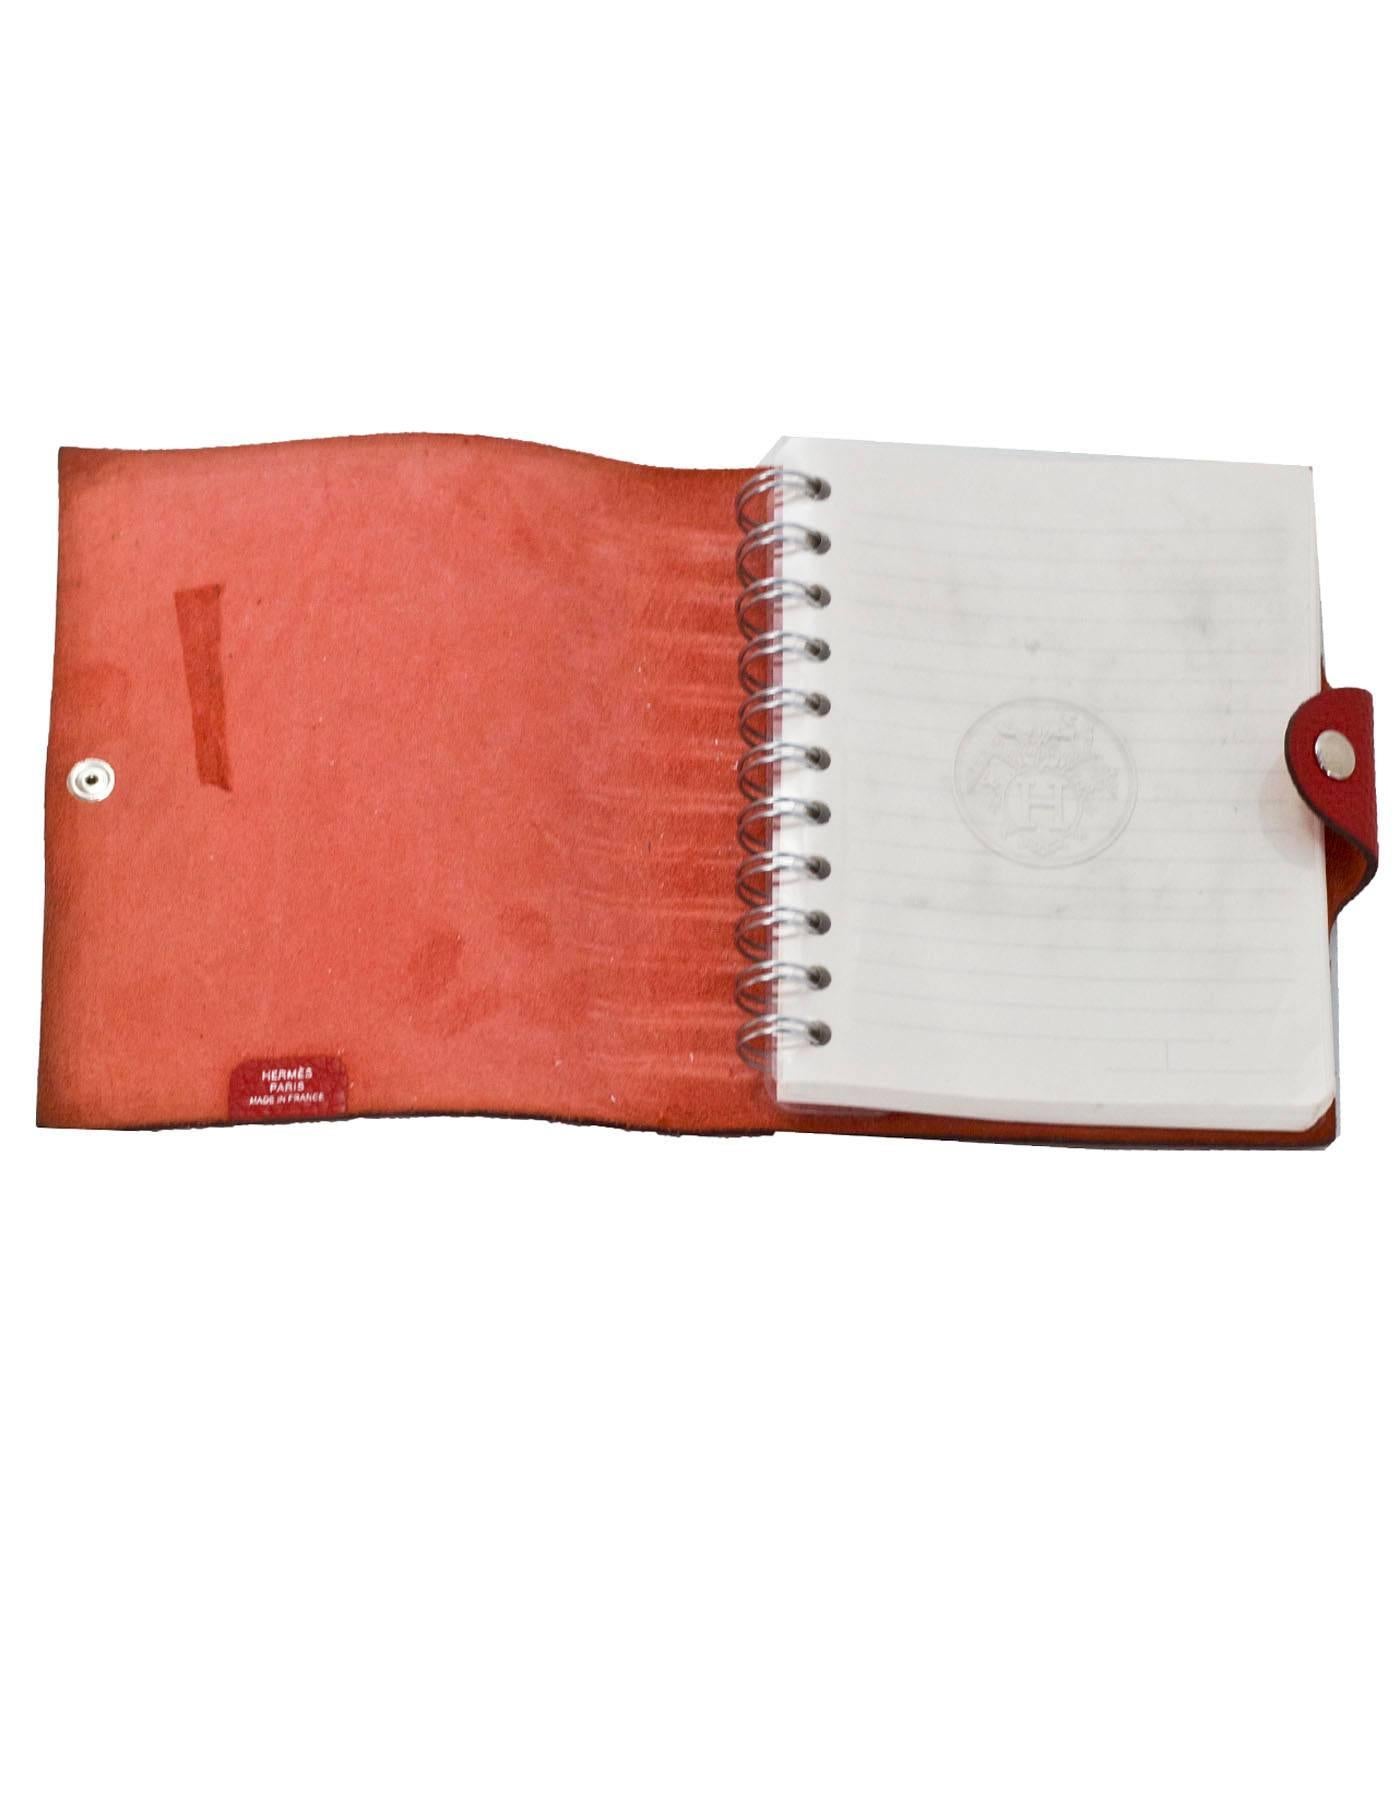 Hermes Red Togo Leather Ulysse PM Notebook Cover w/ Insert 2